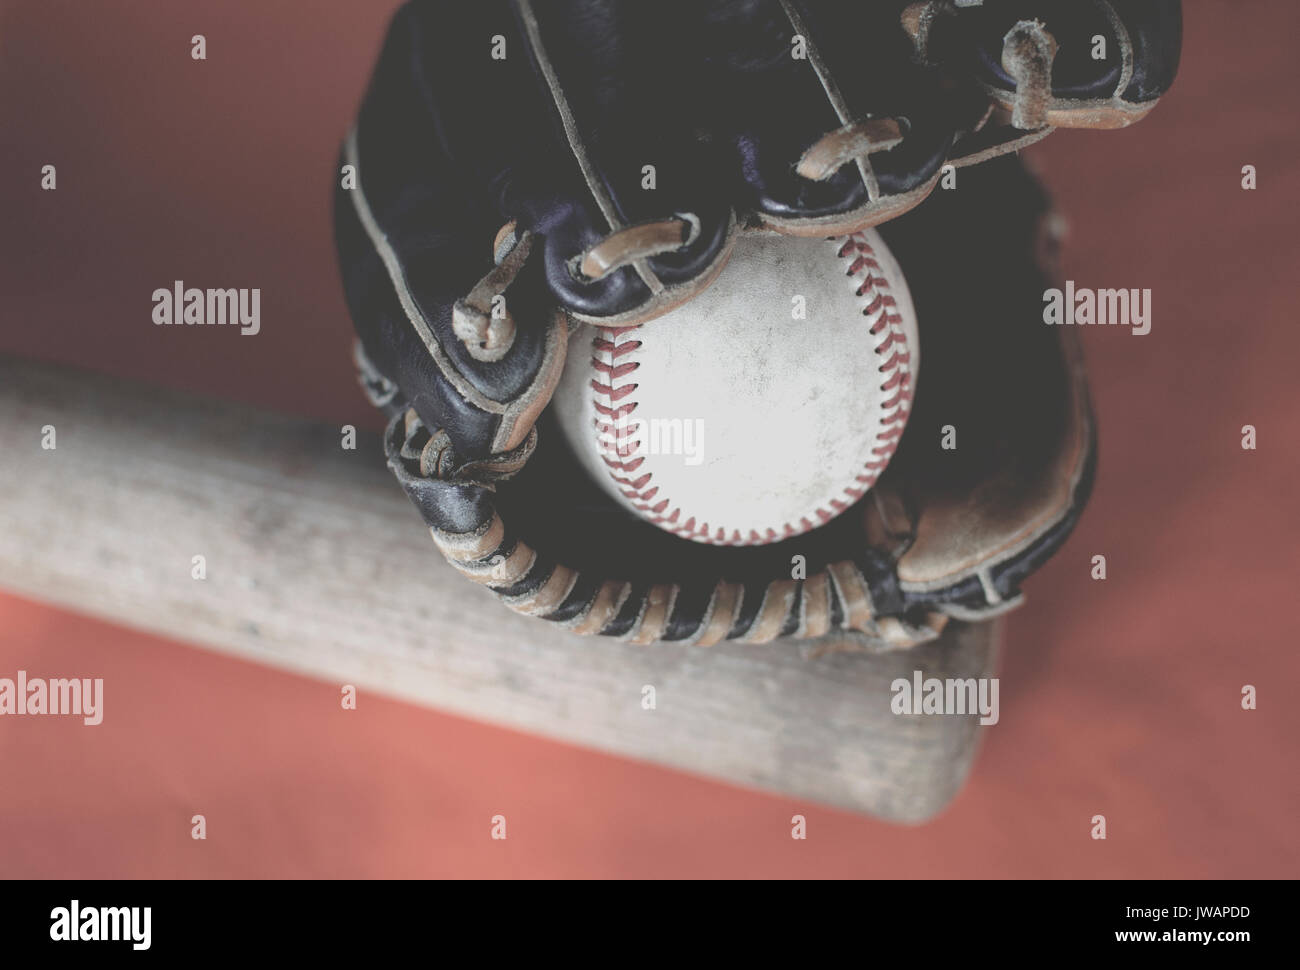 Vintage style image of baseball bat, ball glove and old leather ball for sports background.  Shows game equipment. Stock Photo